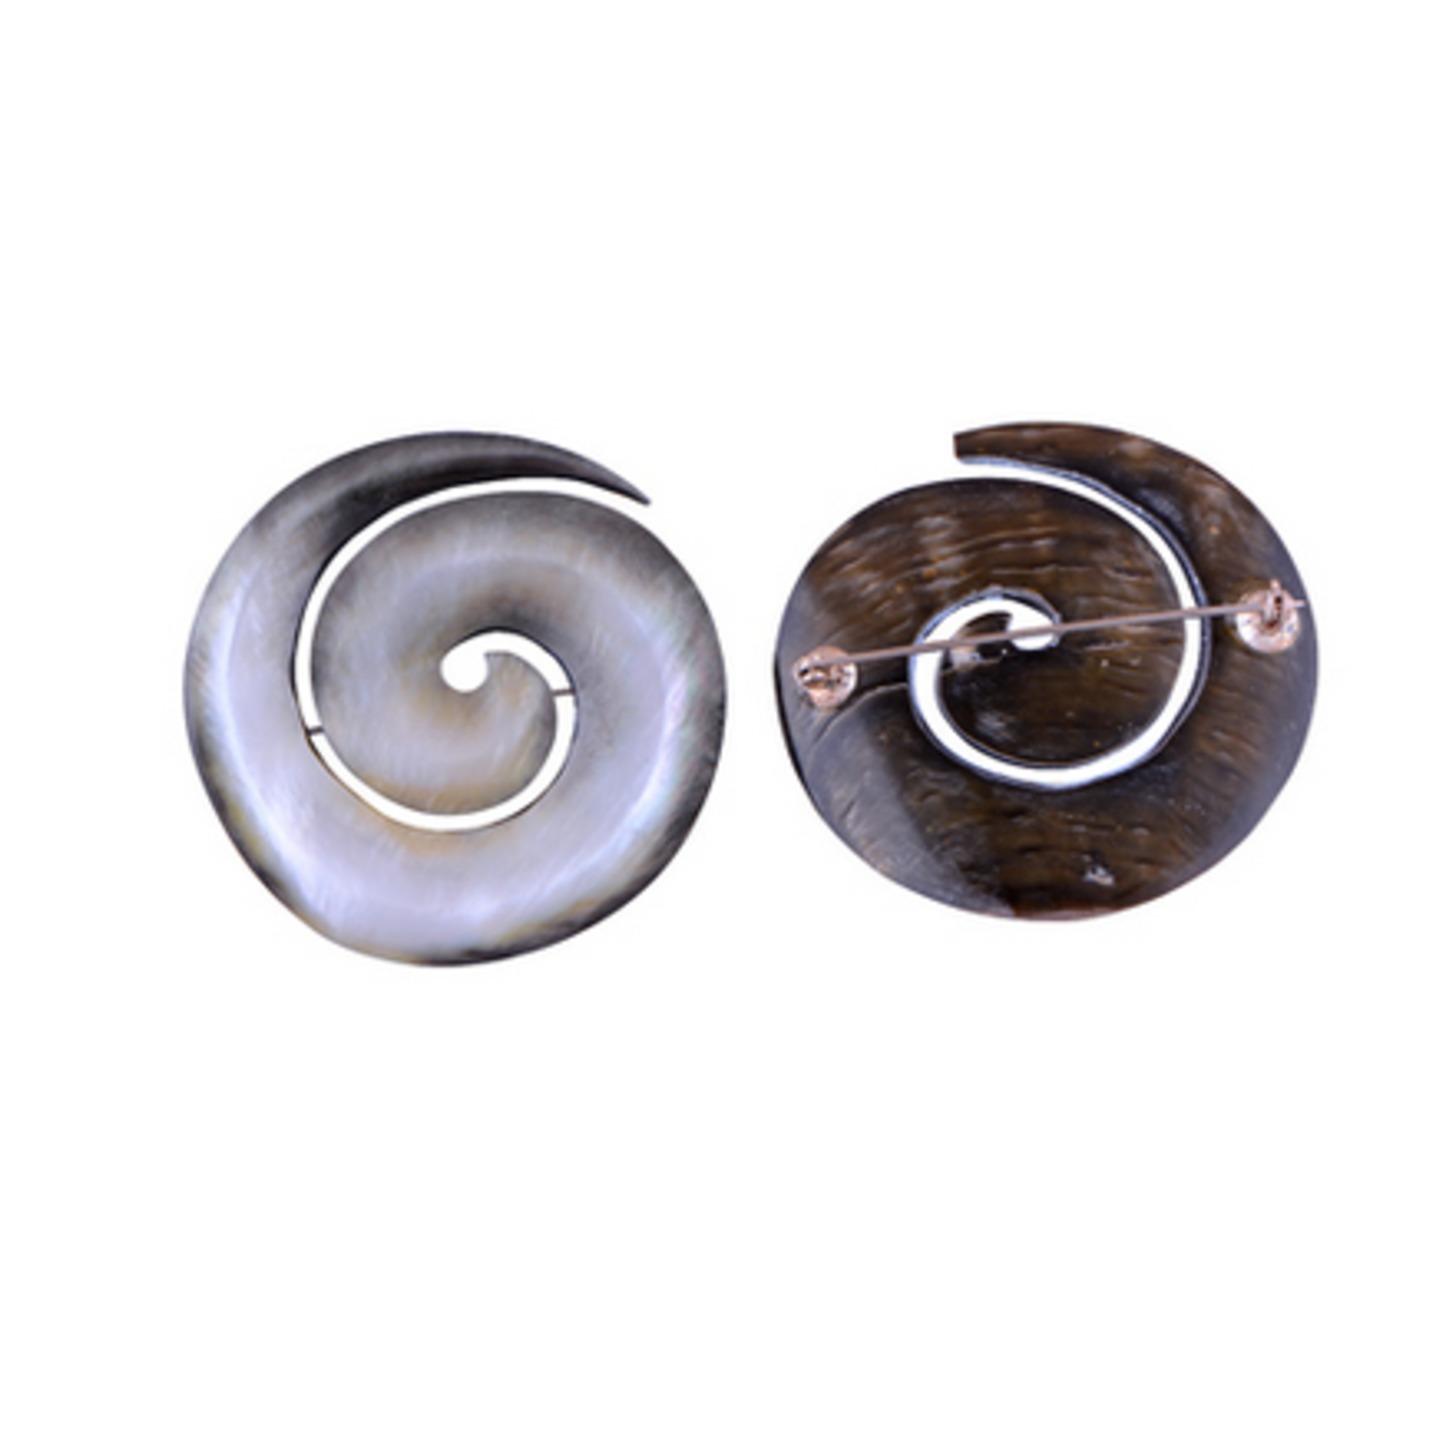 The Black Hole Shell Silver Brooch